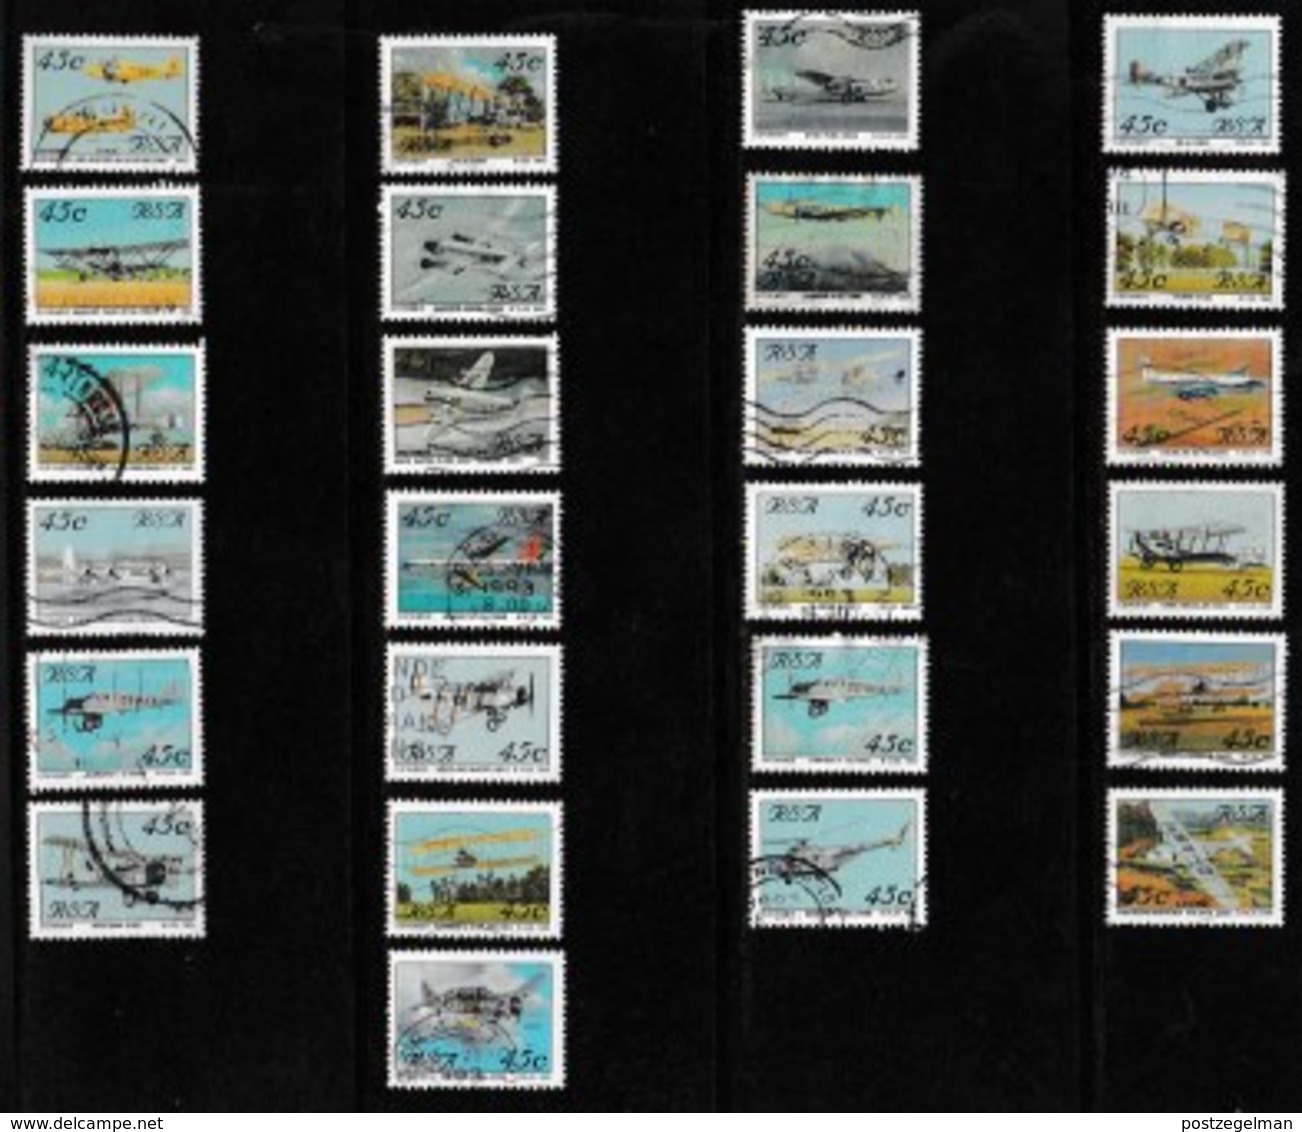 SOUTH AFRICA 1993 Used Stamp(s) Aeroplanes 865-889 - Airplanes